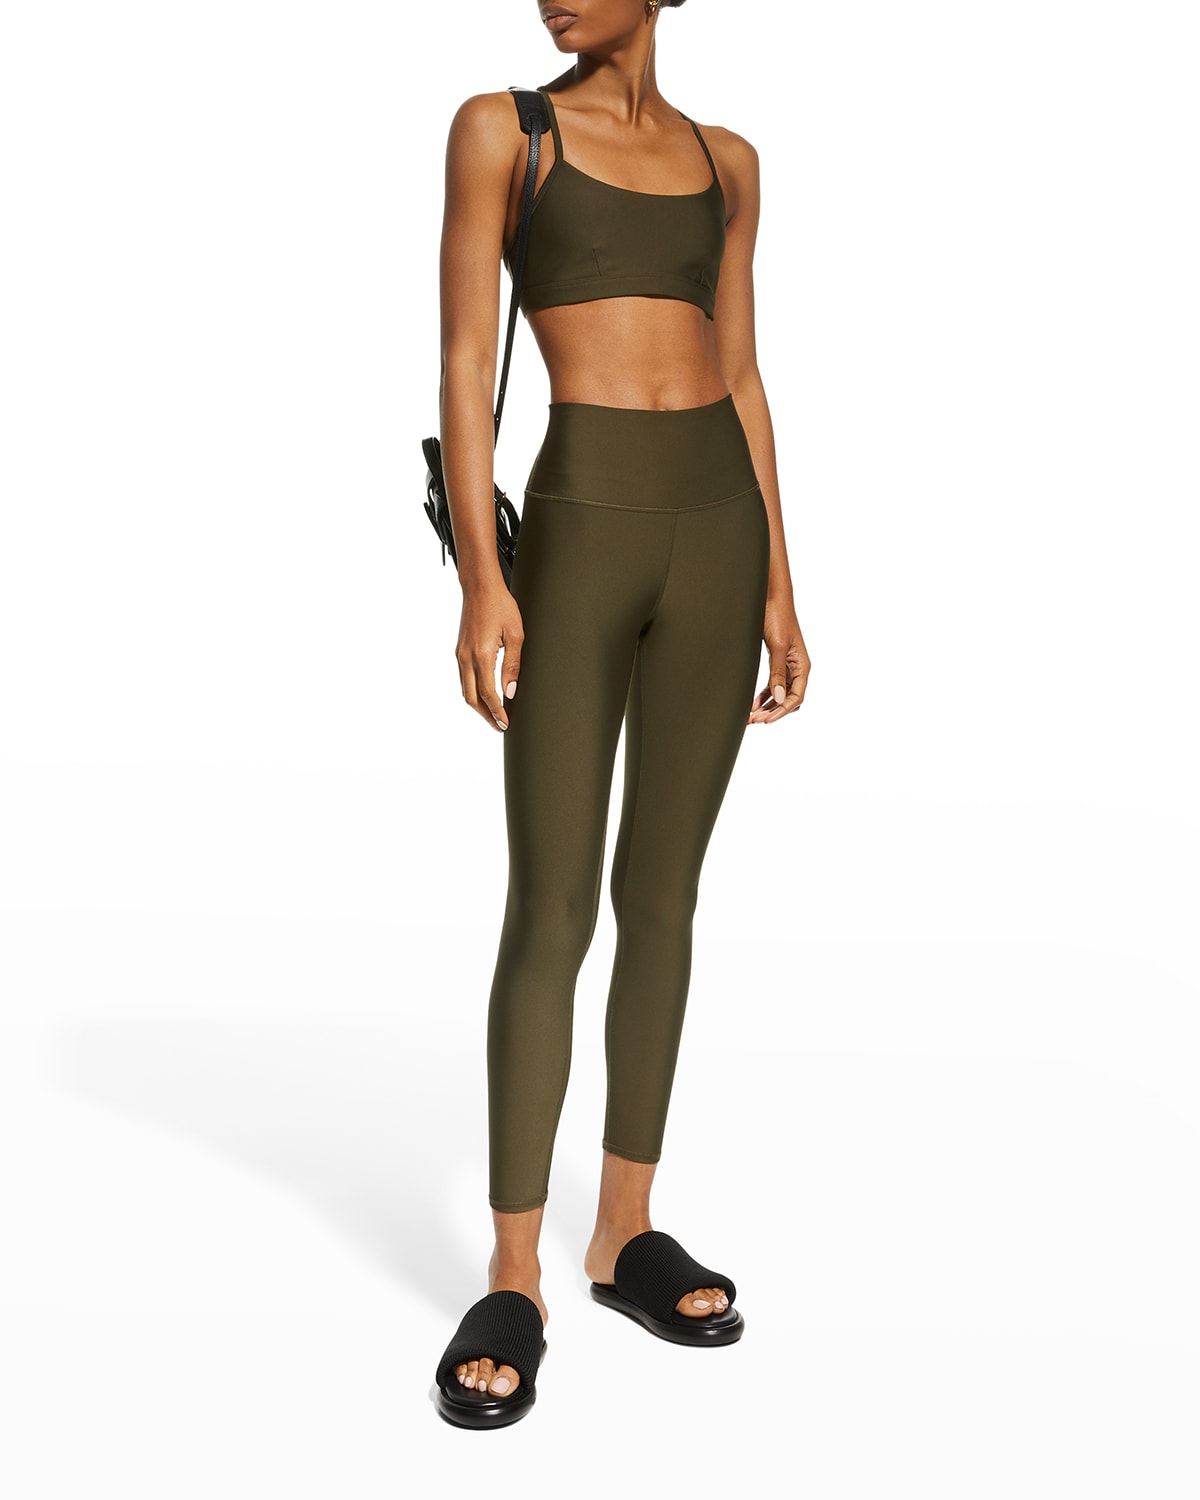 Airlift Intrigue Low-Impact Sports Bra